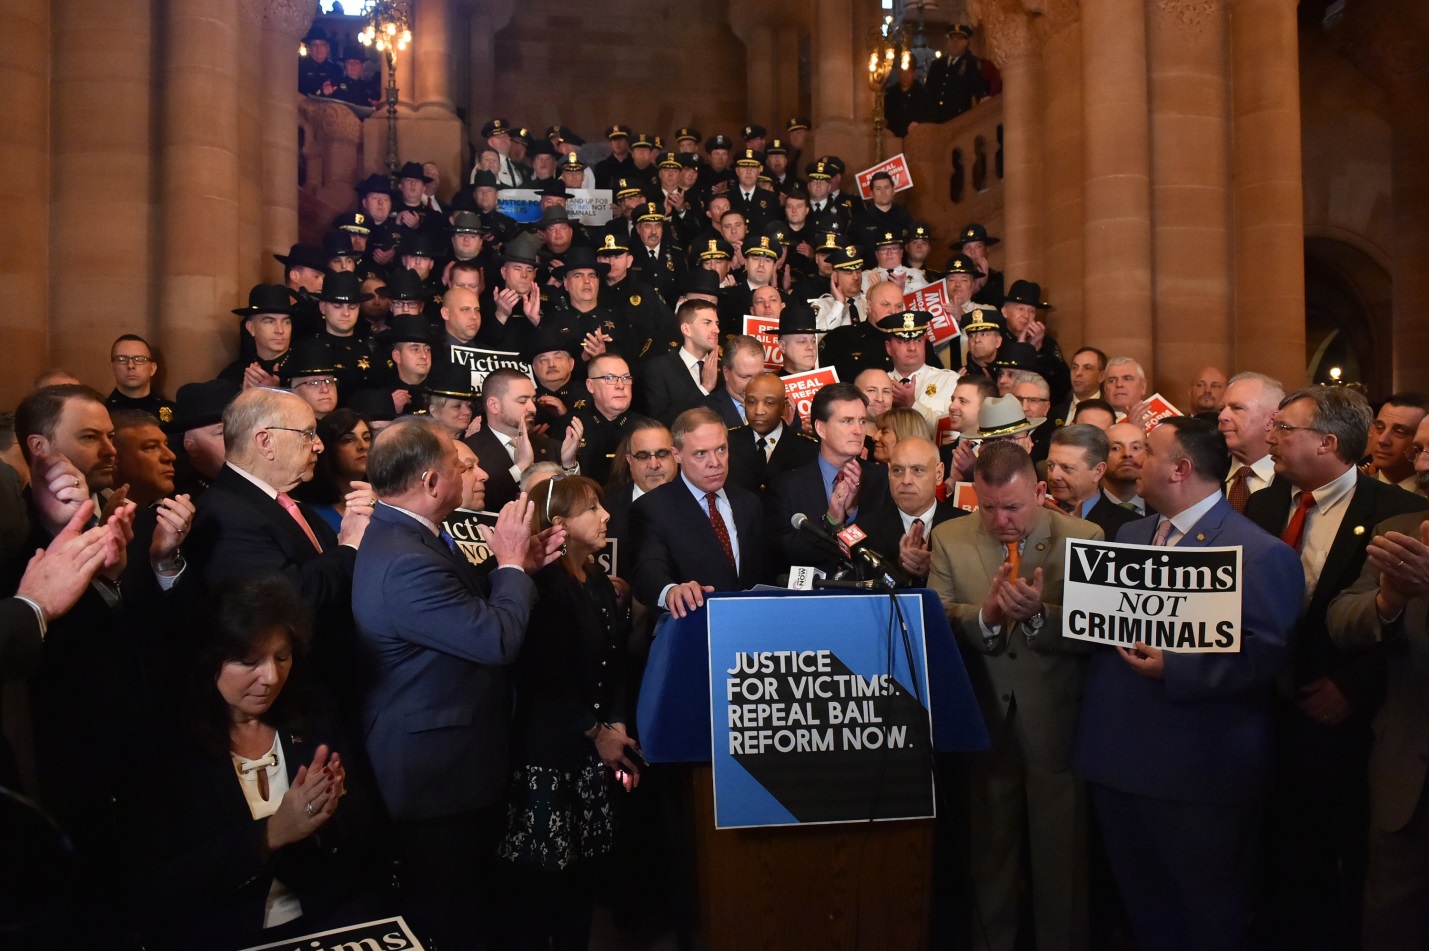 Assemblyman Joe DeStefano (R,C,I,Ref-Medford) pictured with Minority Leader Will Barclay, law enforcement and elected officials at a bail reform rally on February 4, 2020 in Albany, NY.